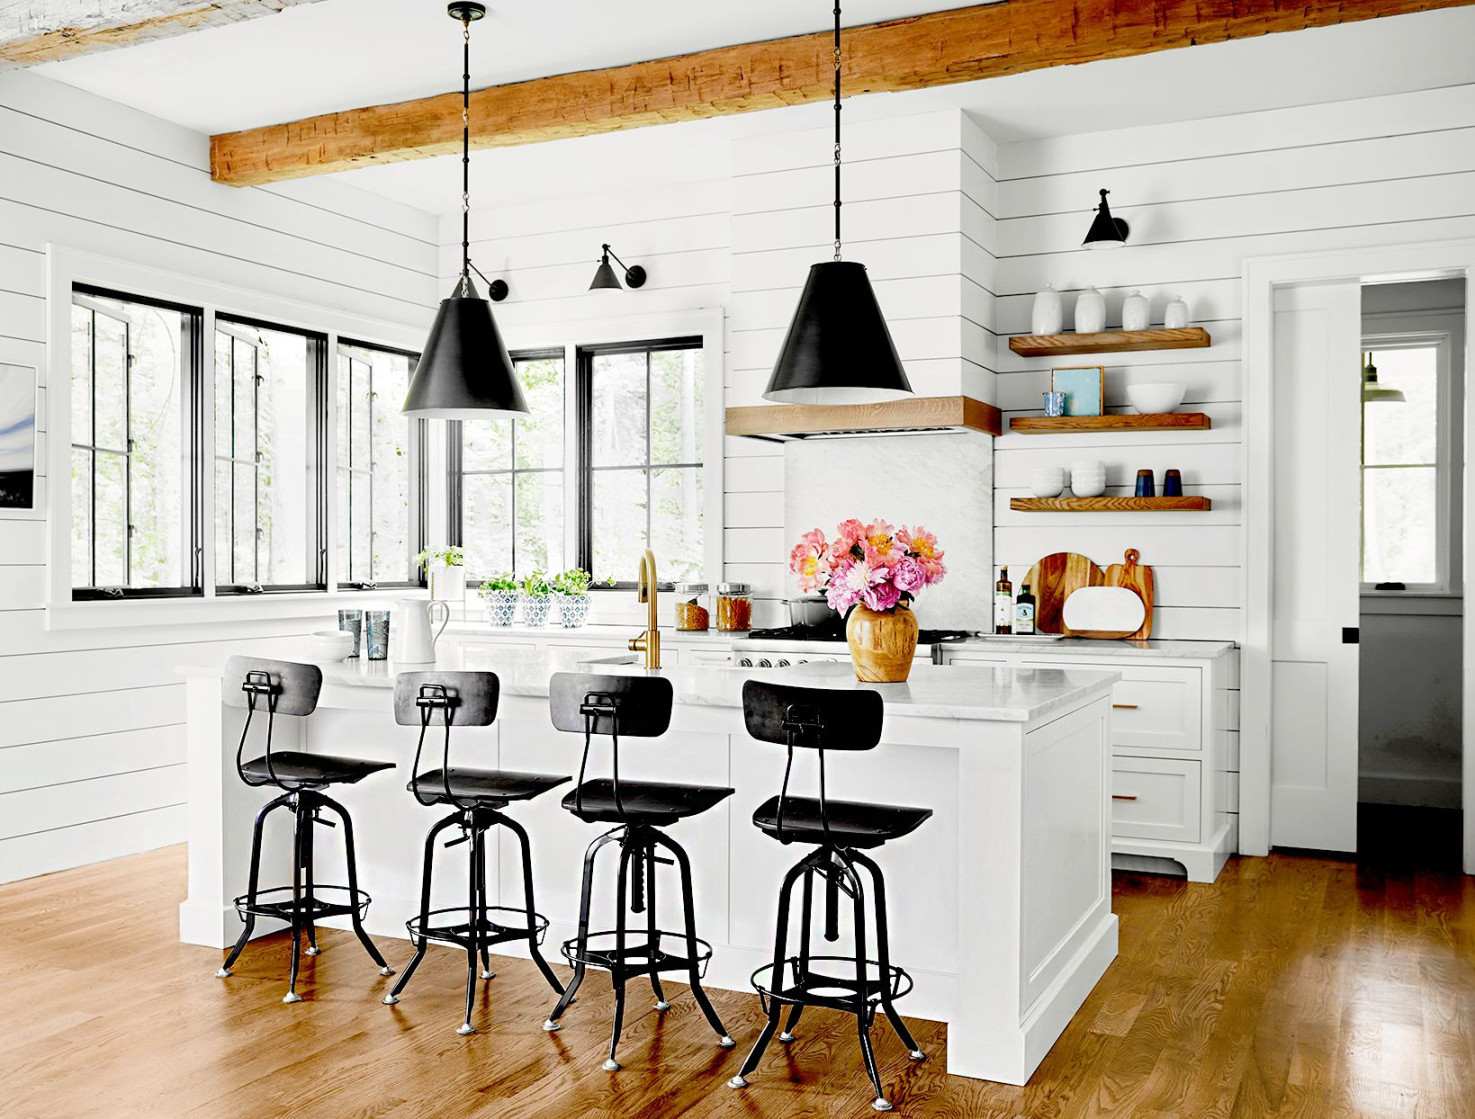 Farmhouse Kitchen Ideas to Add Rustic Charm in Modern Spaces